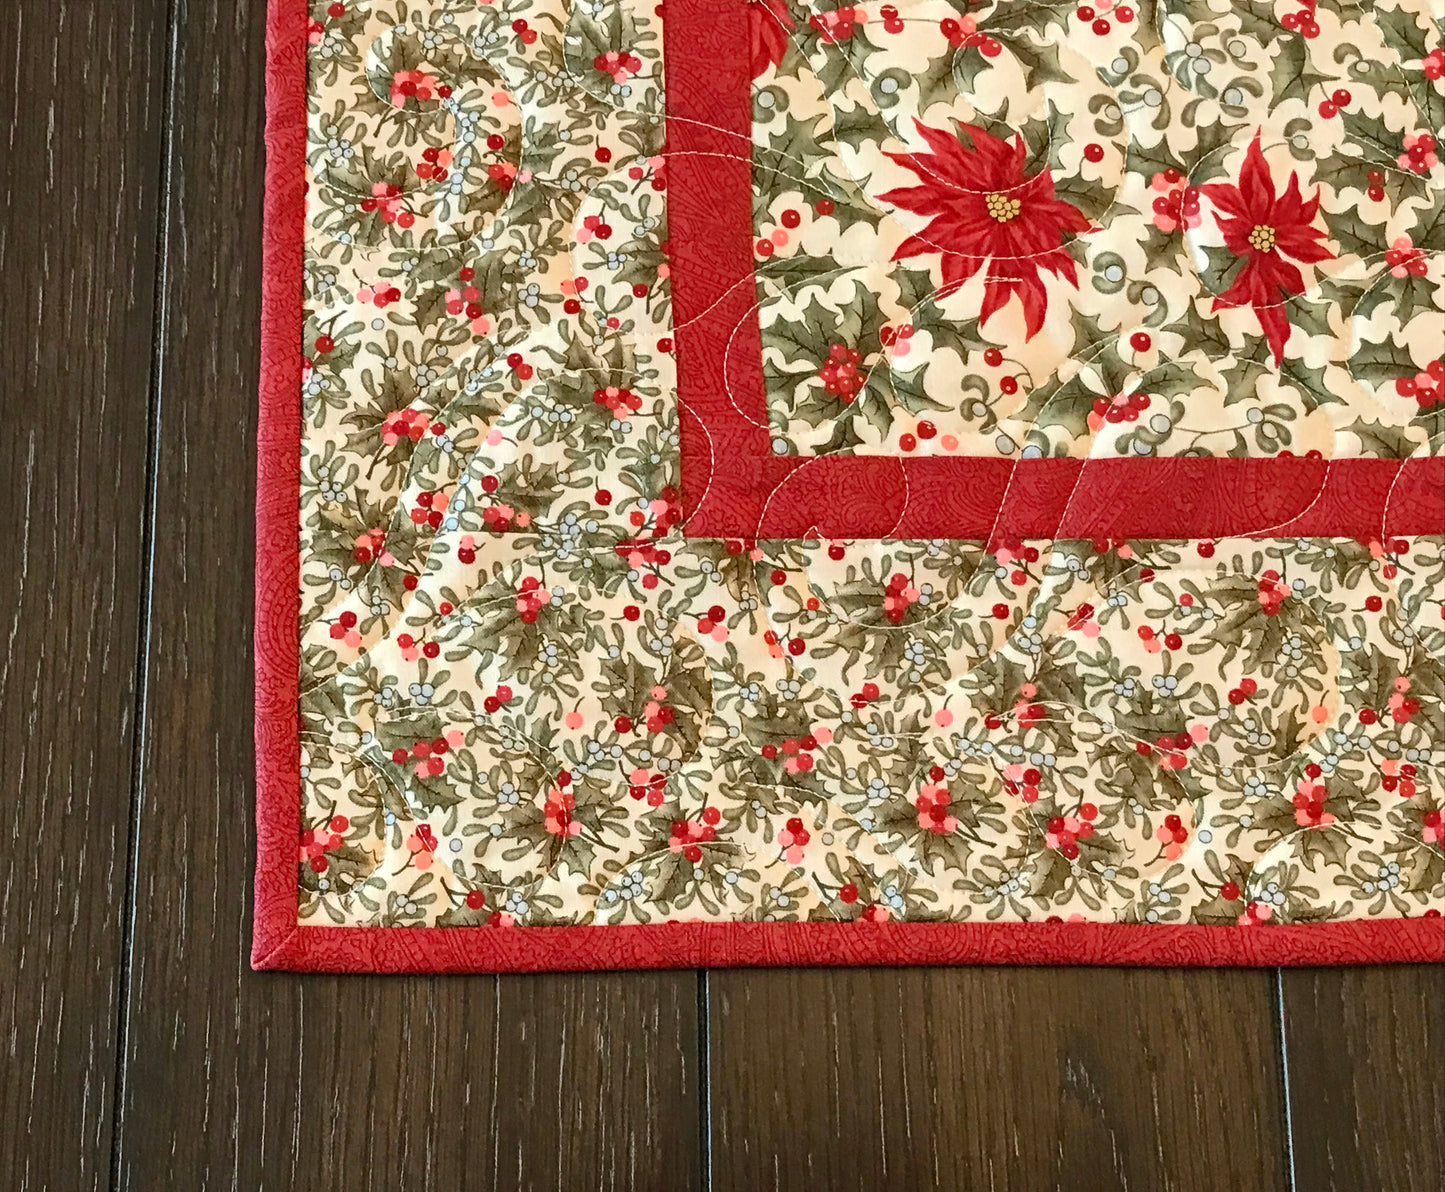 Christmas Poinsettia Table Runner - Handmade Quilts, Digital Patterns, and Home Décor items online - Cuddle Cat Quiltworks